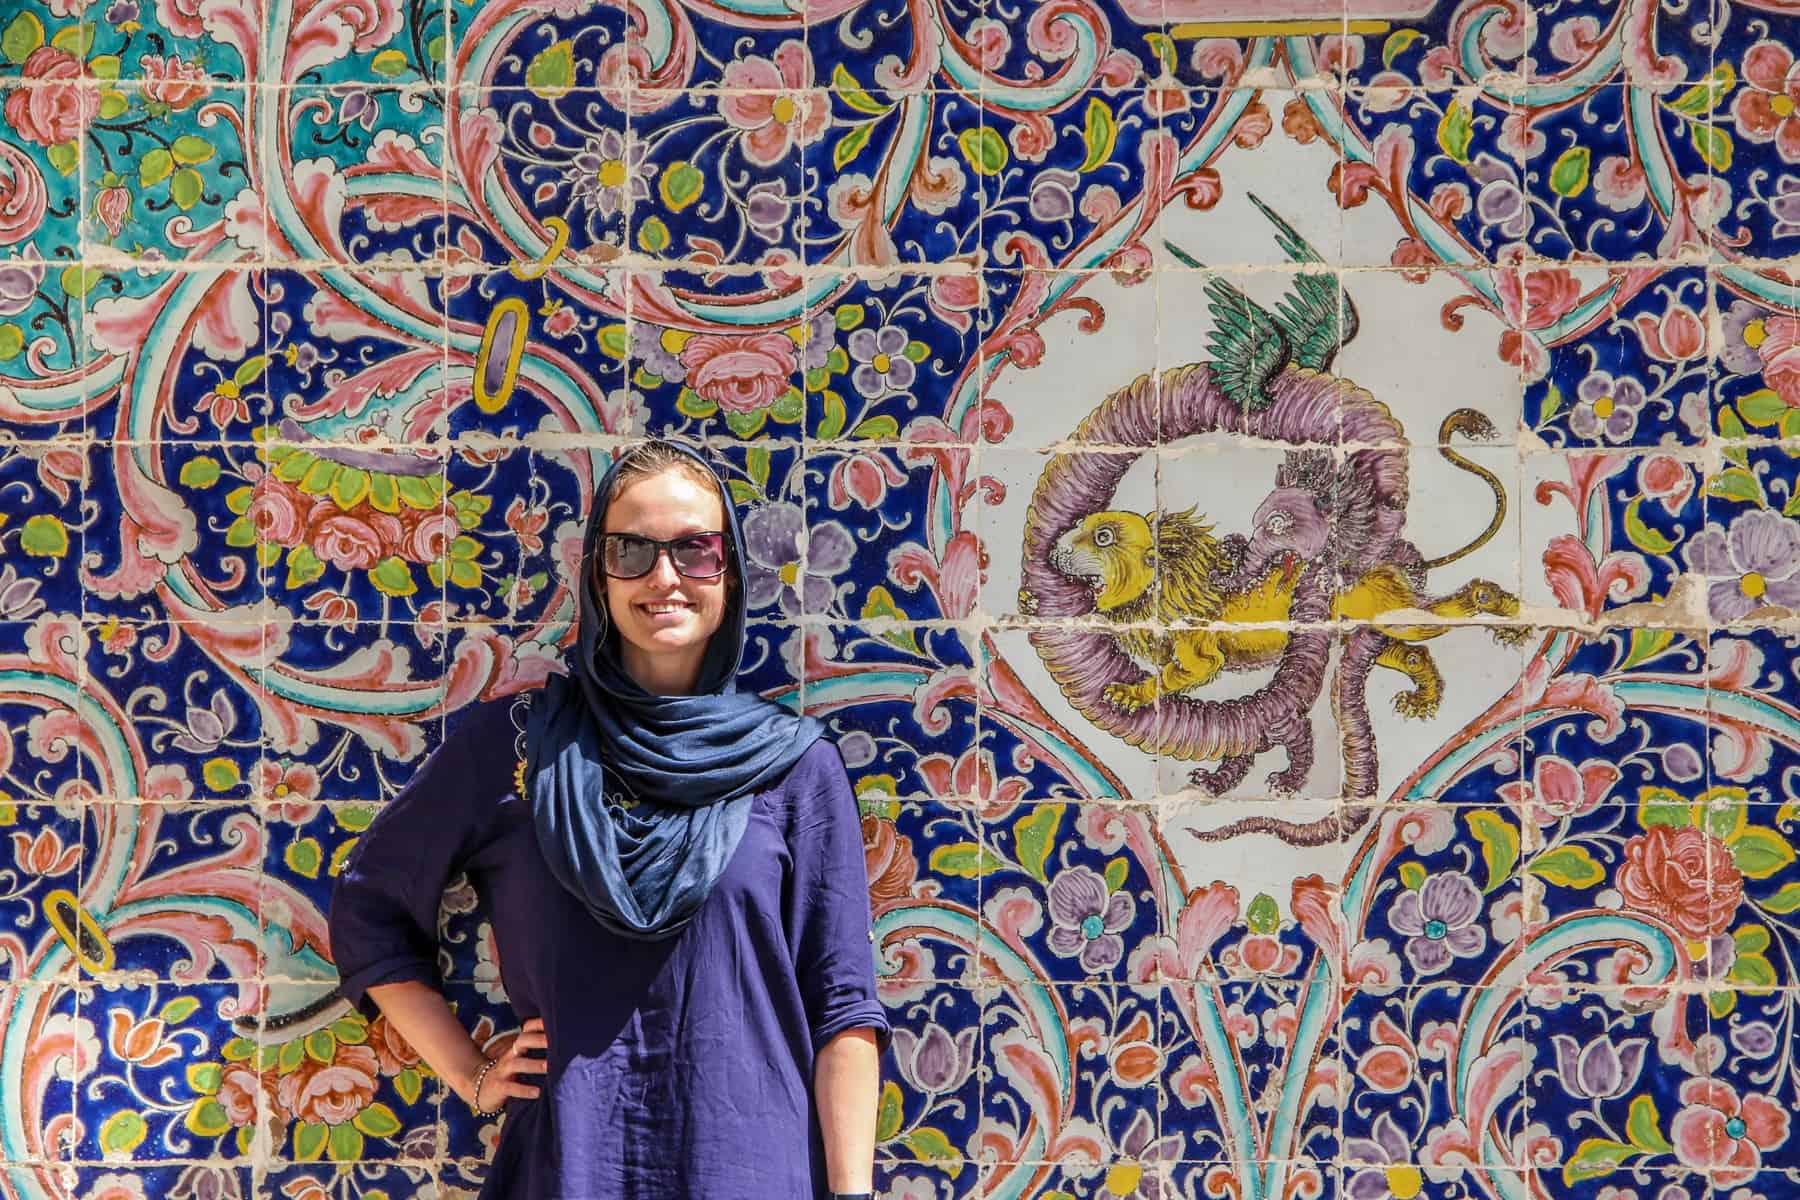 Traveller wearing long-sleeved shirts and a head scarf to travel in Iran